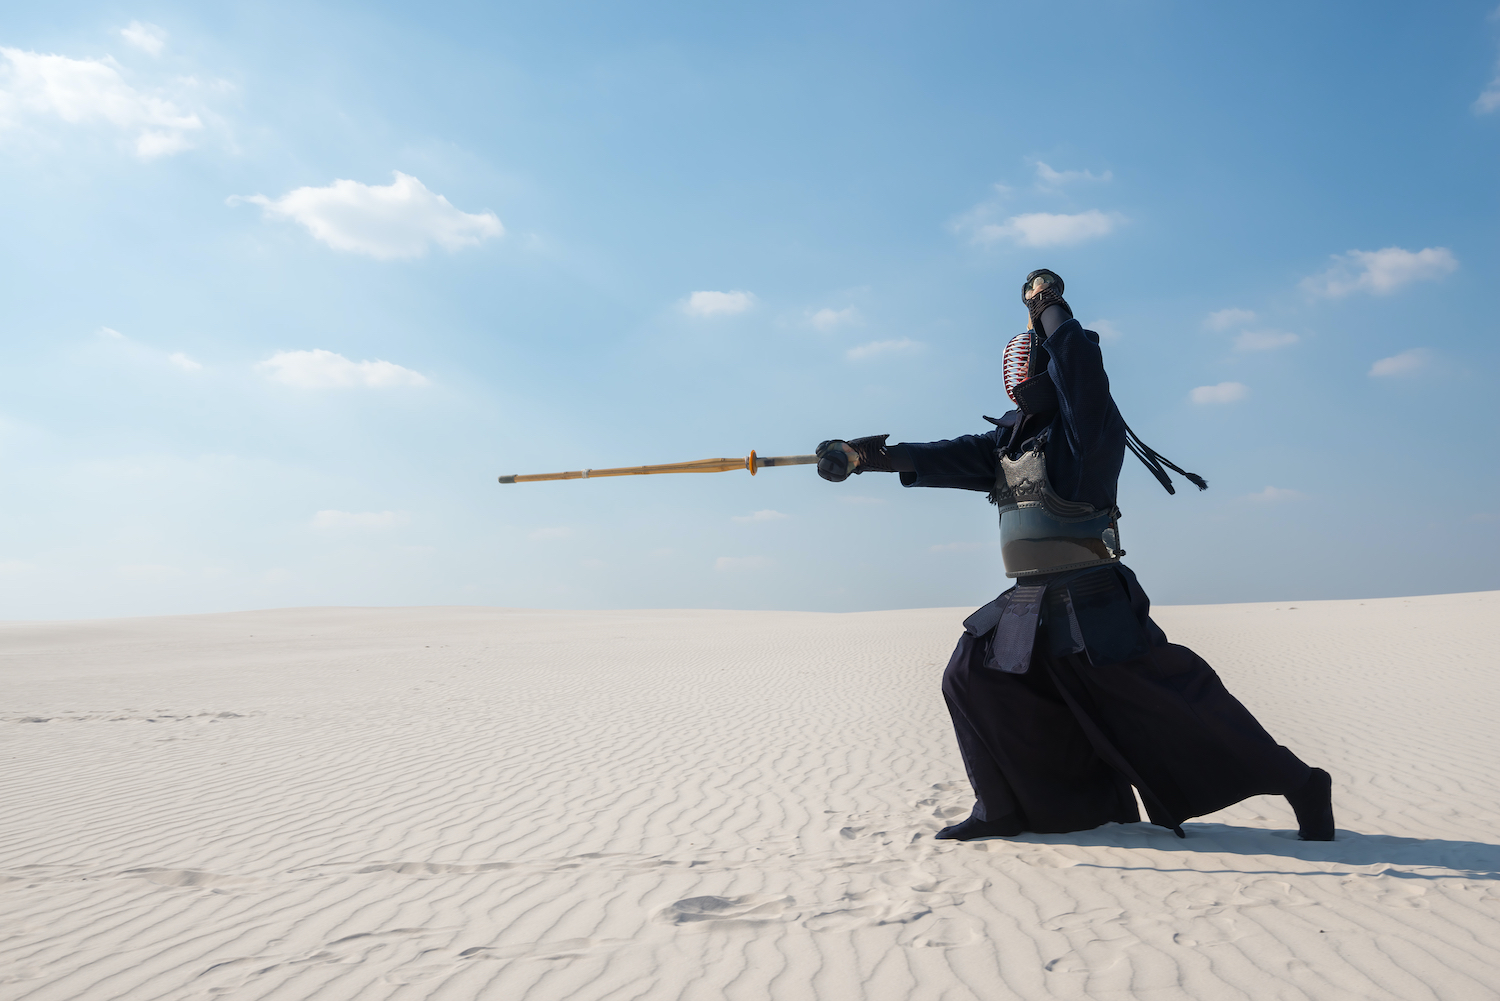 Man in traditional armor for kendo makes a deep lunge with his sword, during practice martial art in a wilderness at a sunny day. Tranquility and liberation of the mind in silence of the desert.